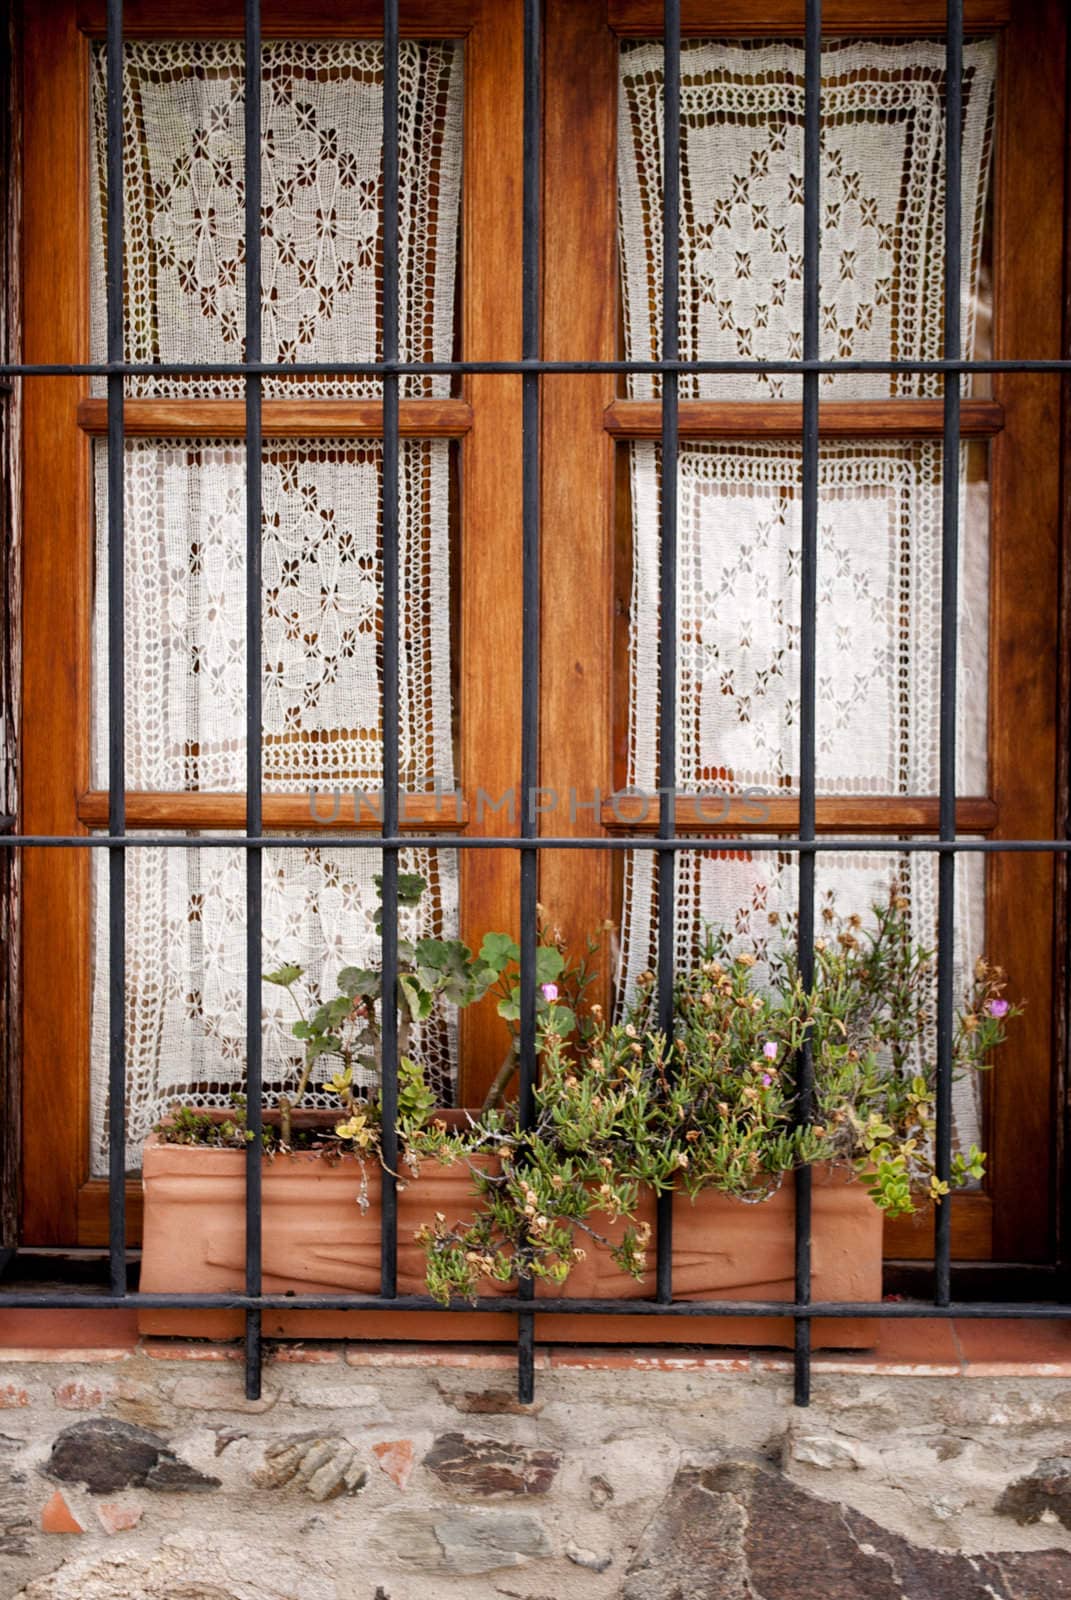 window with grates